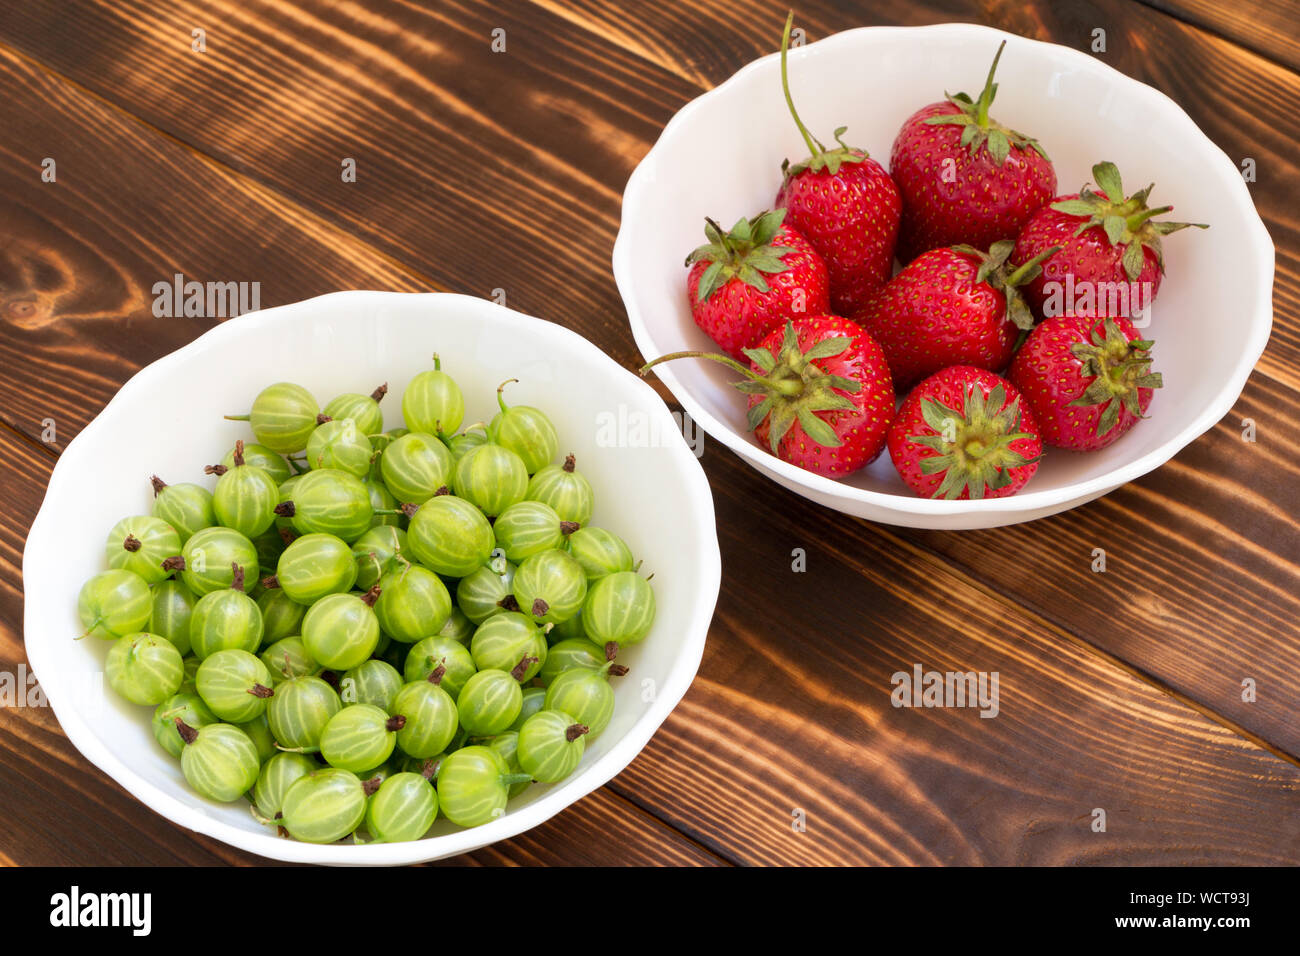 Green gooseberries and red ripened strawberries in white bowls on wooden table. Top view. Close-up. Natural organic homegrown products concept. Raw fo Stock Photo